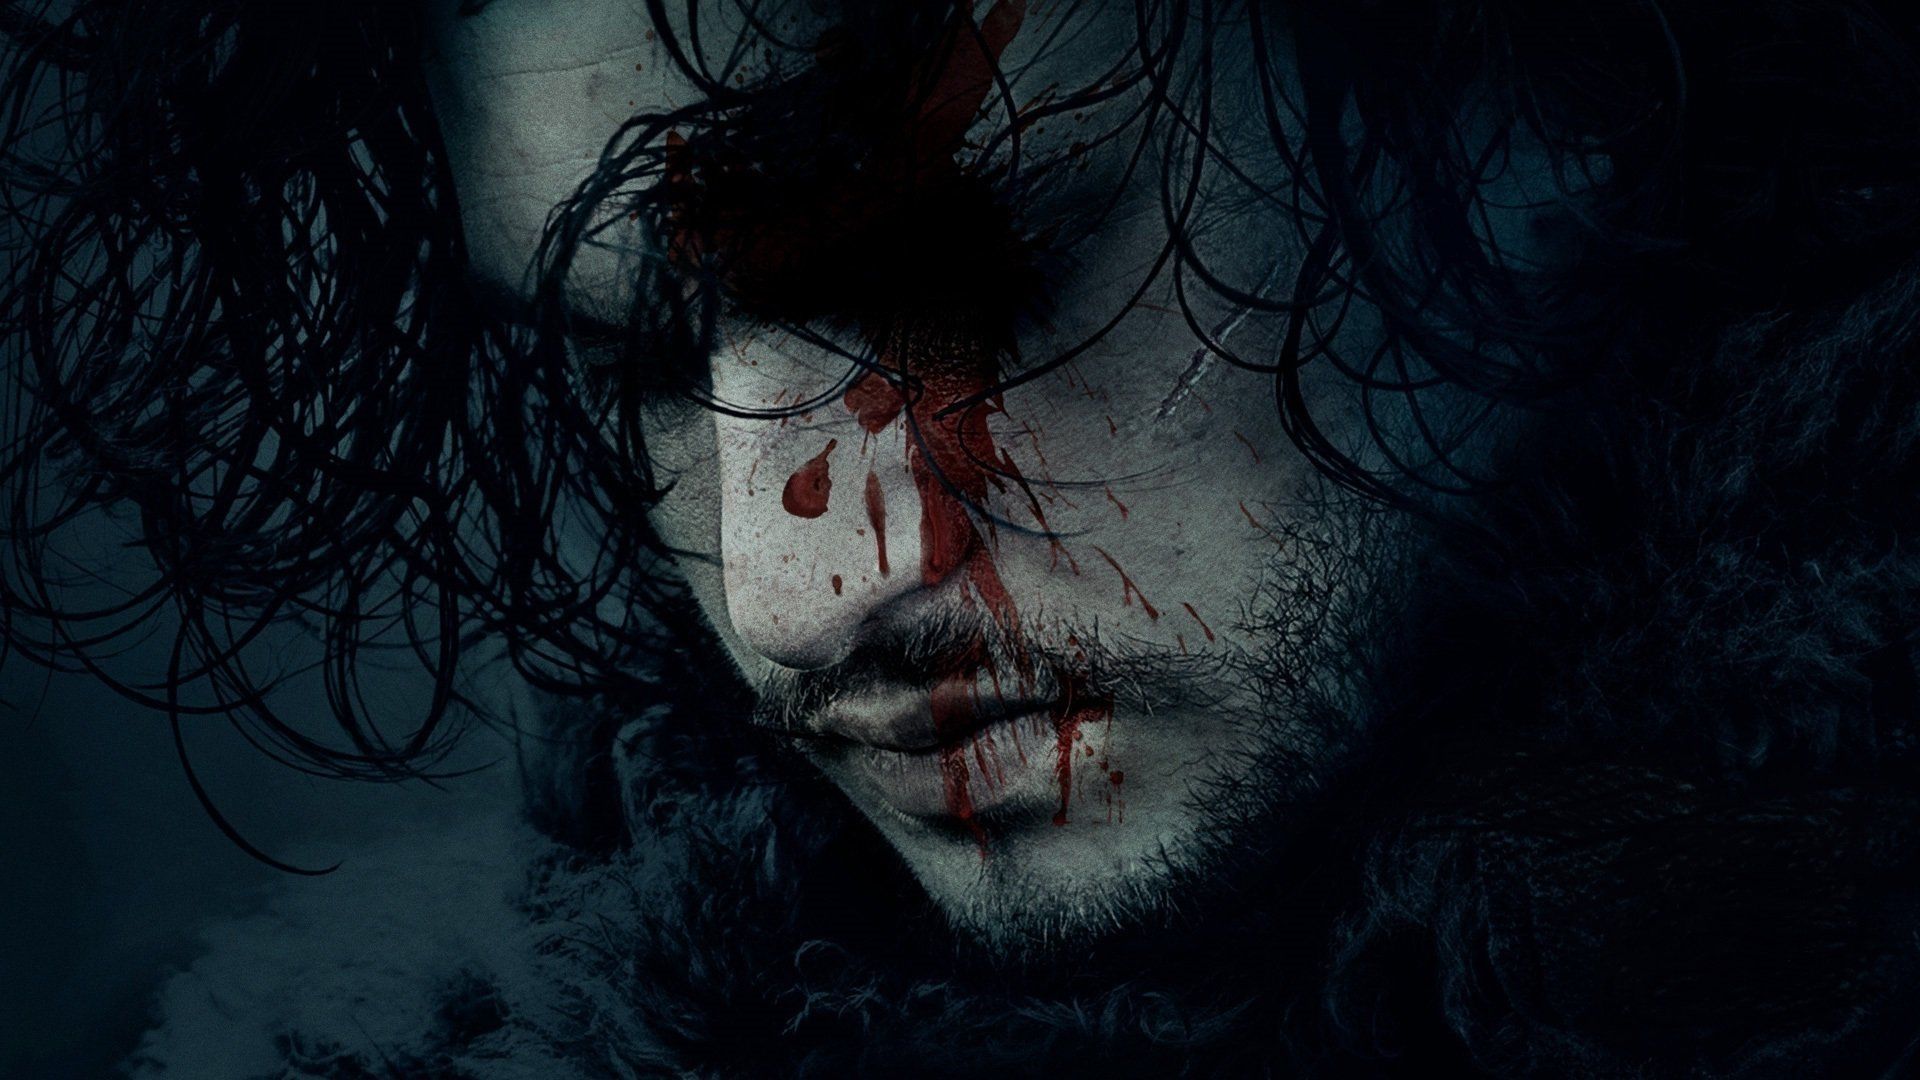 game of thrones wallpaper 1080p,darkness,fiction,human,fictional character,flesh